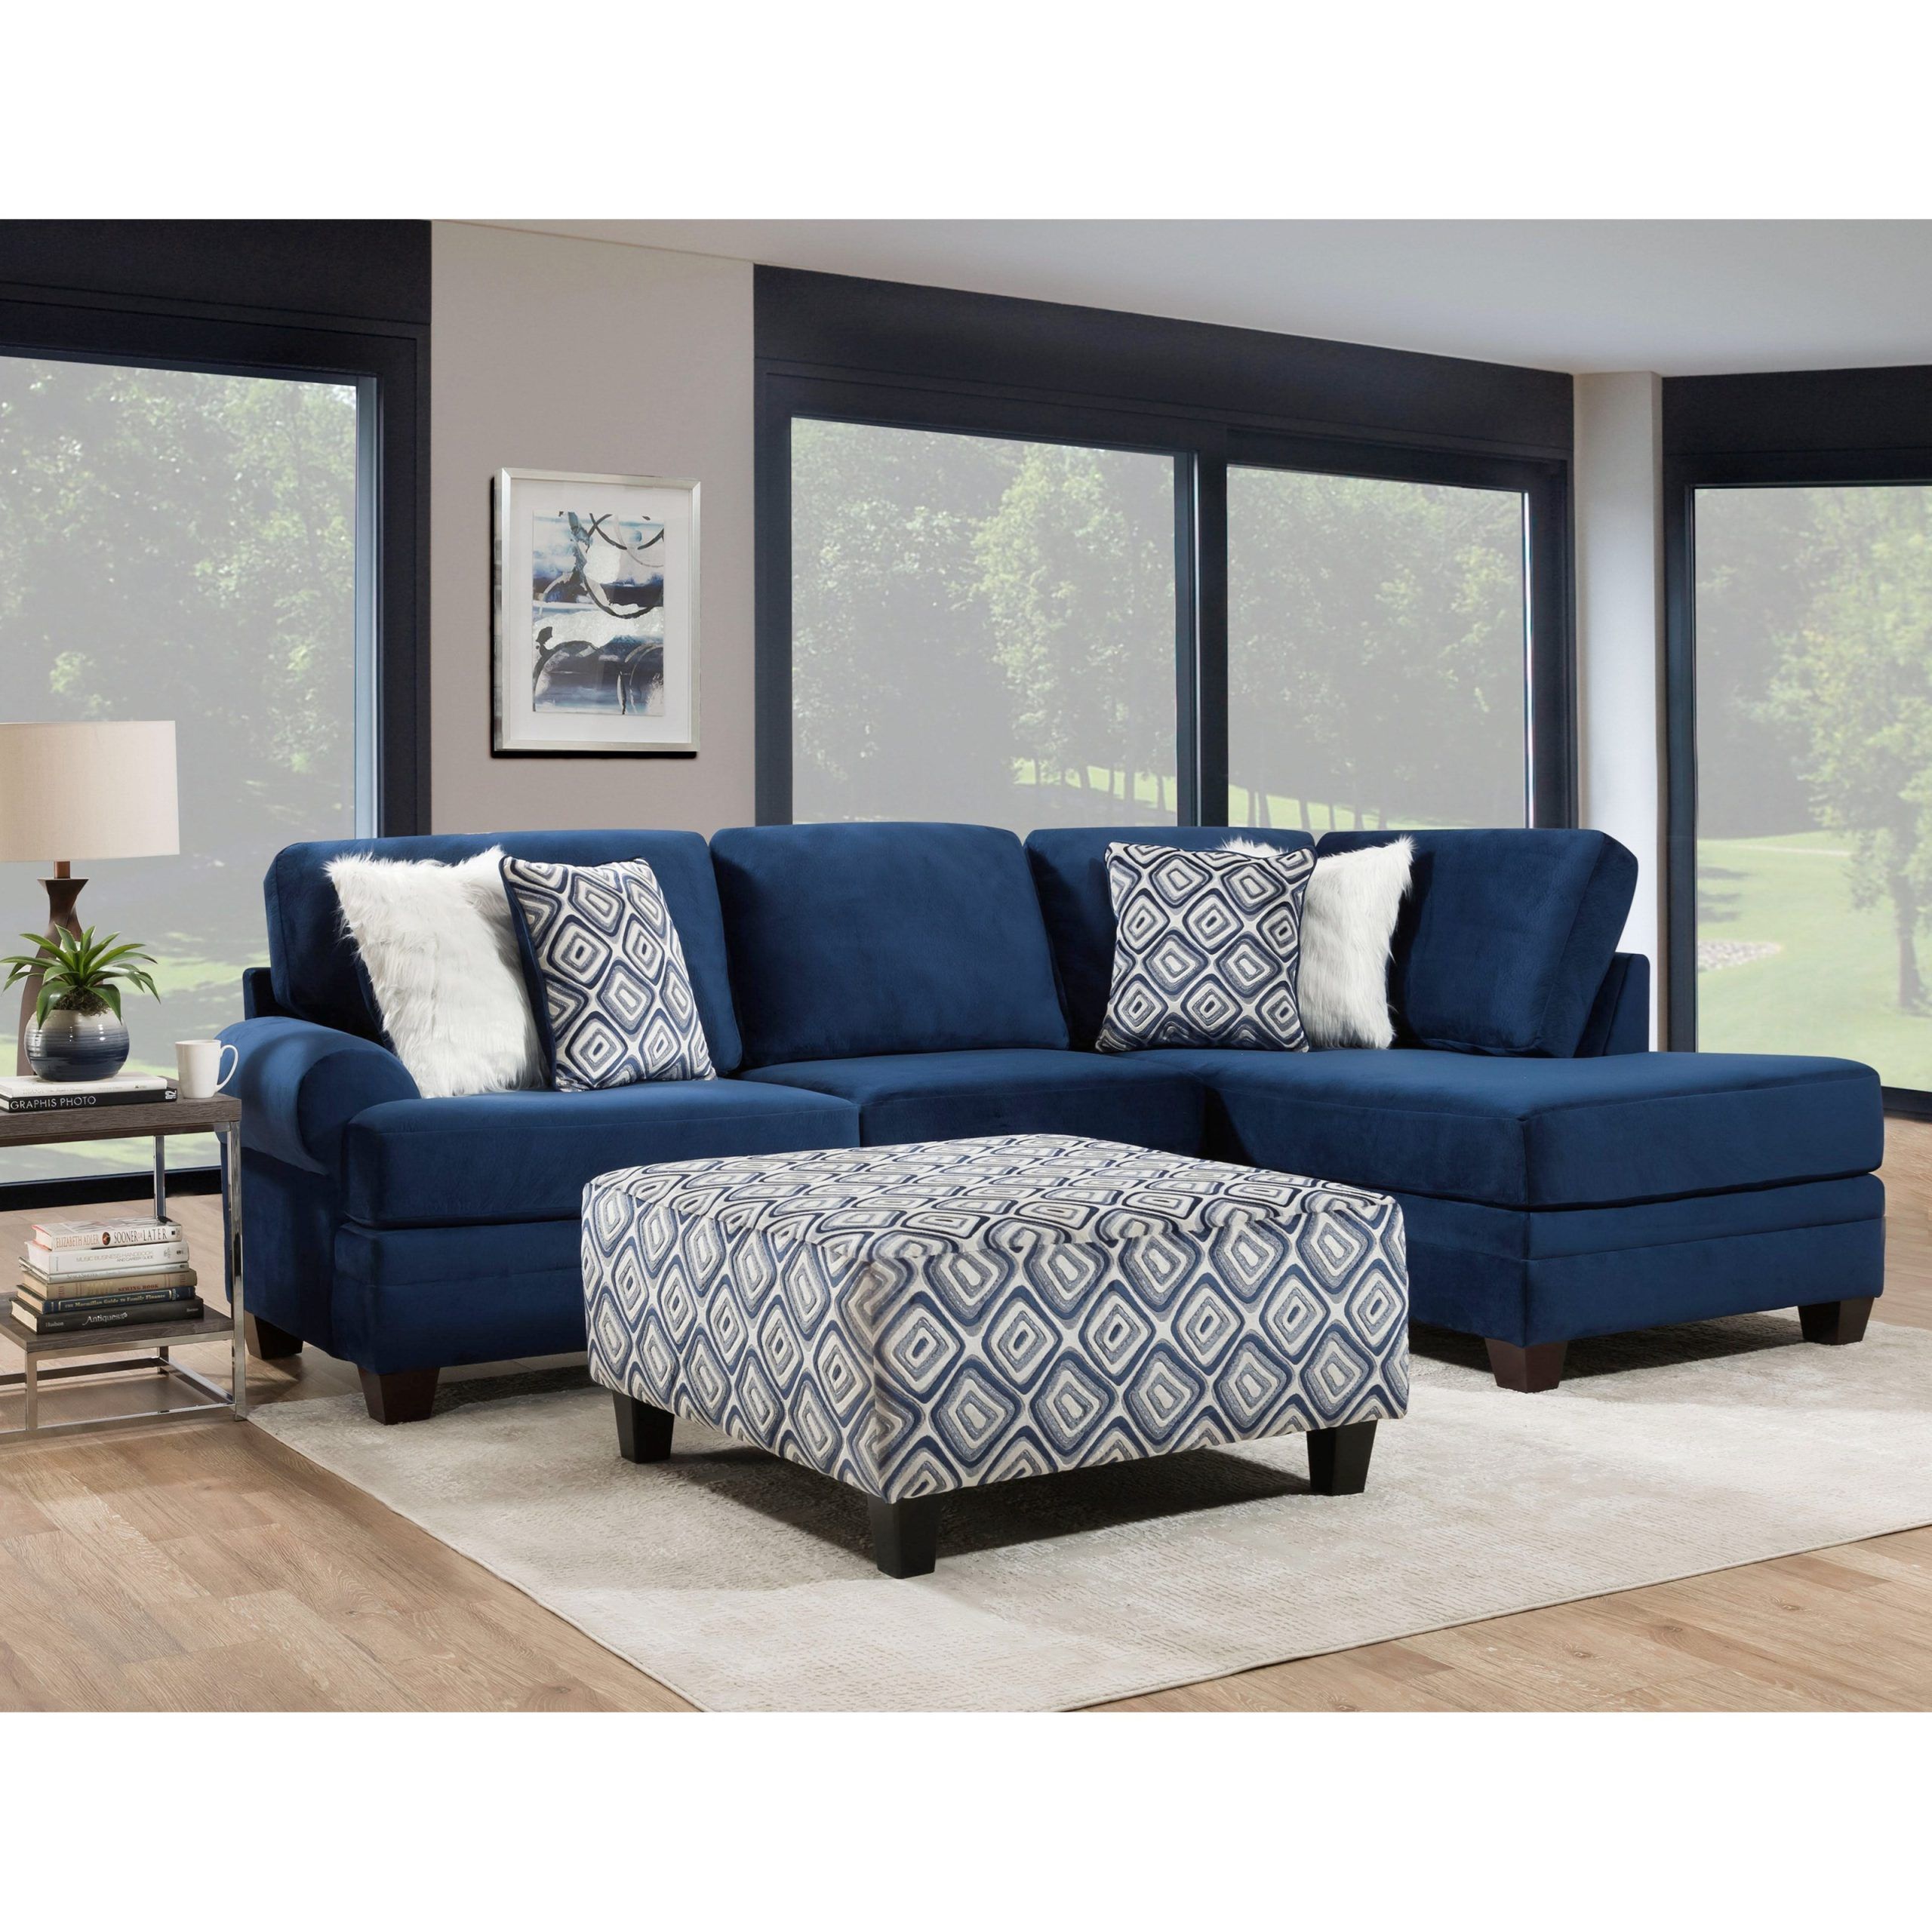 Albany 8642 8642 2pc Gens 35249 Groovy Navy Transitional Sectional Sofa With Regard To Navy Linen Coil Sofas (Gallery 8 of 20)